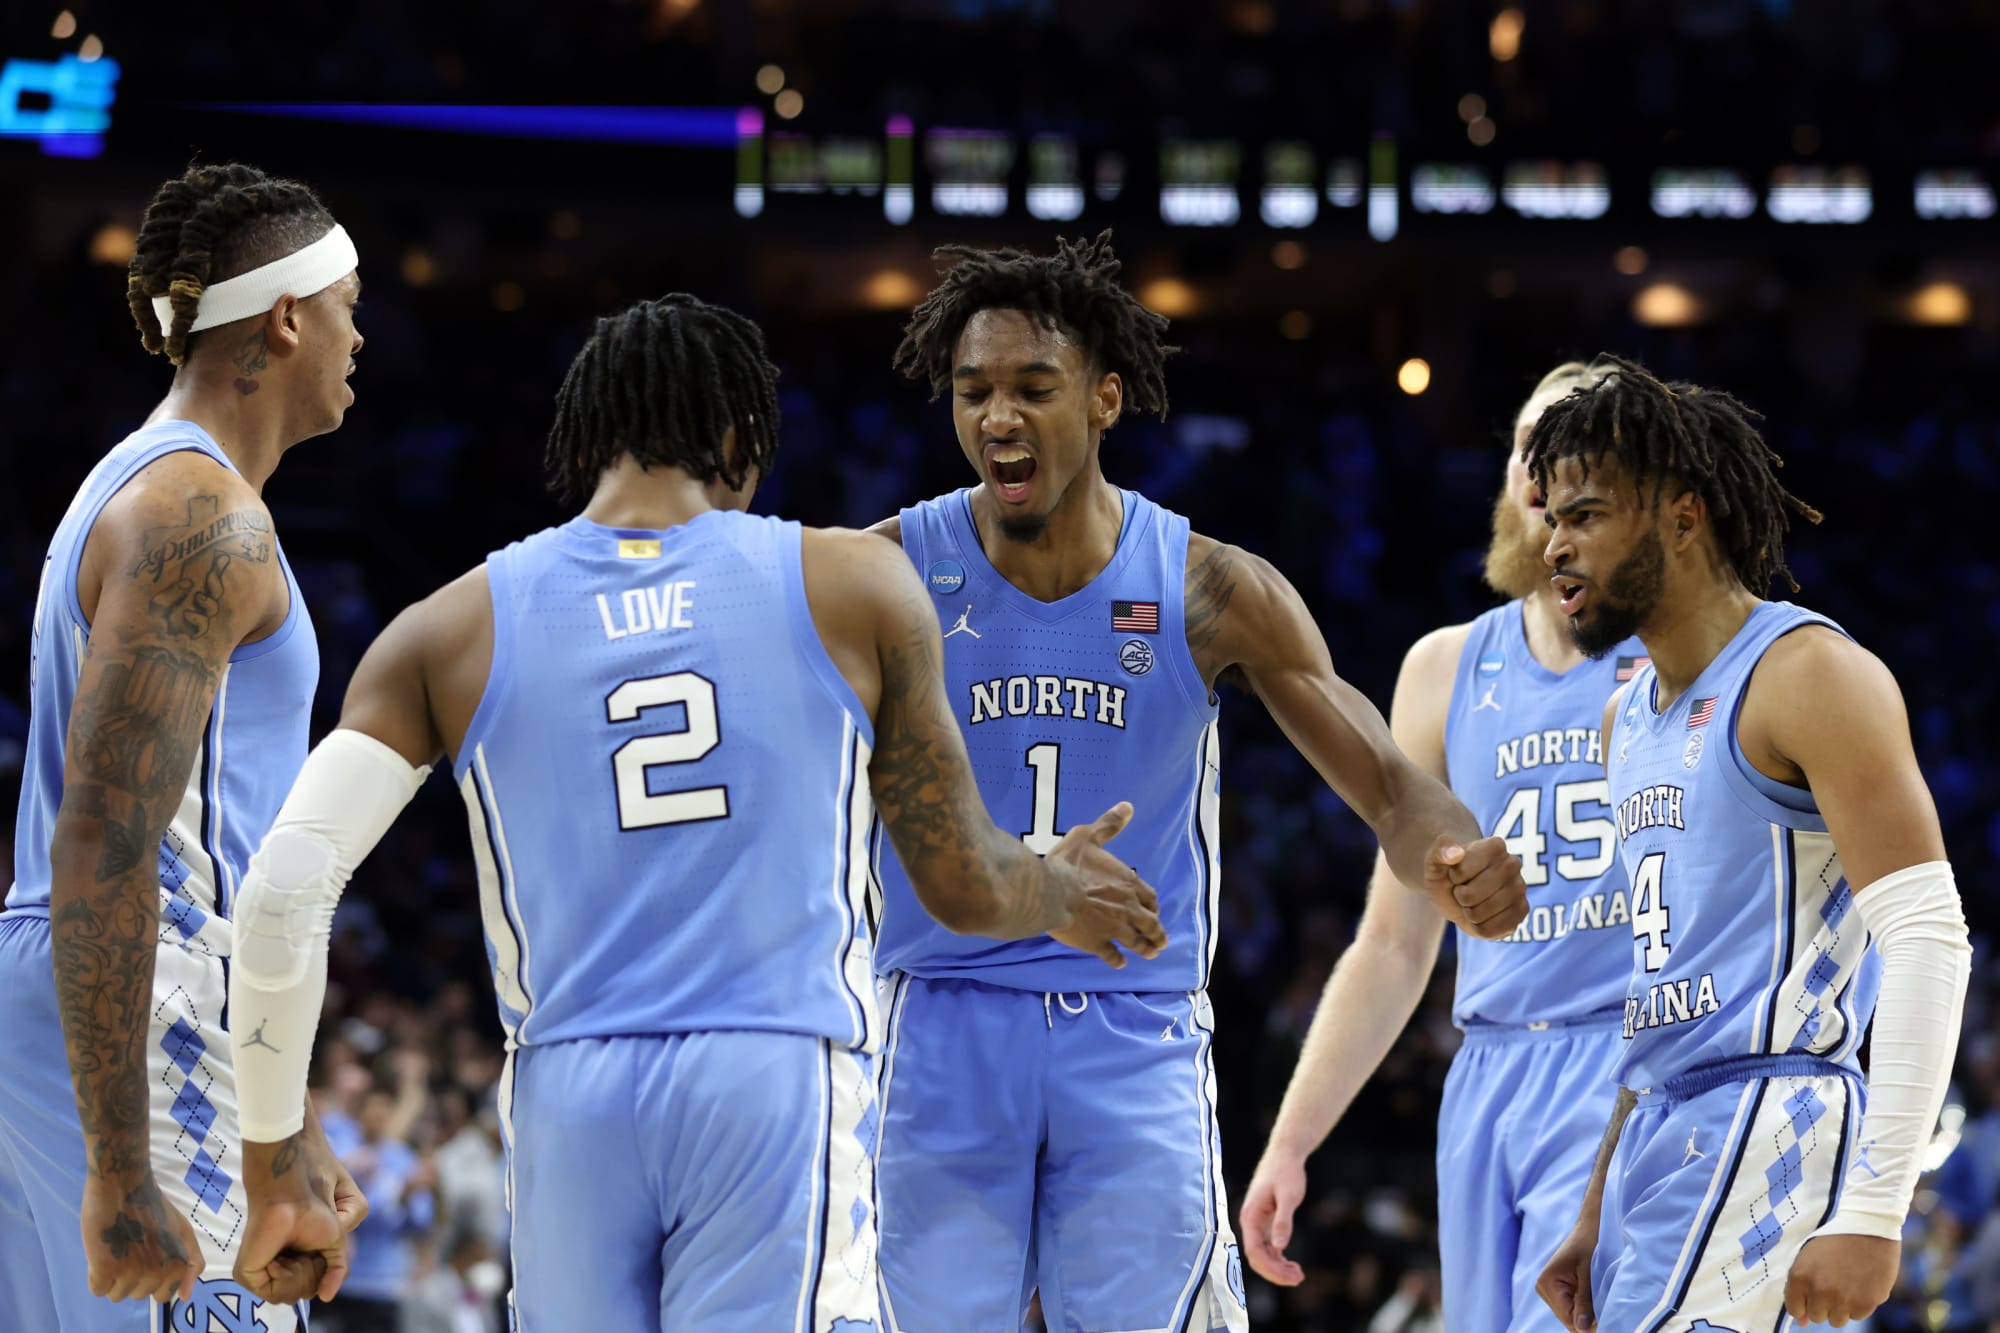 UNC Basketball: Statistics show that America is rooting for Tar Heels